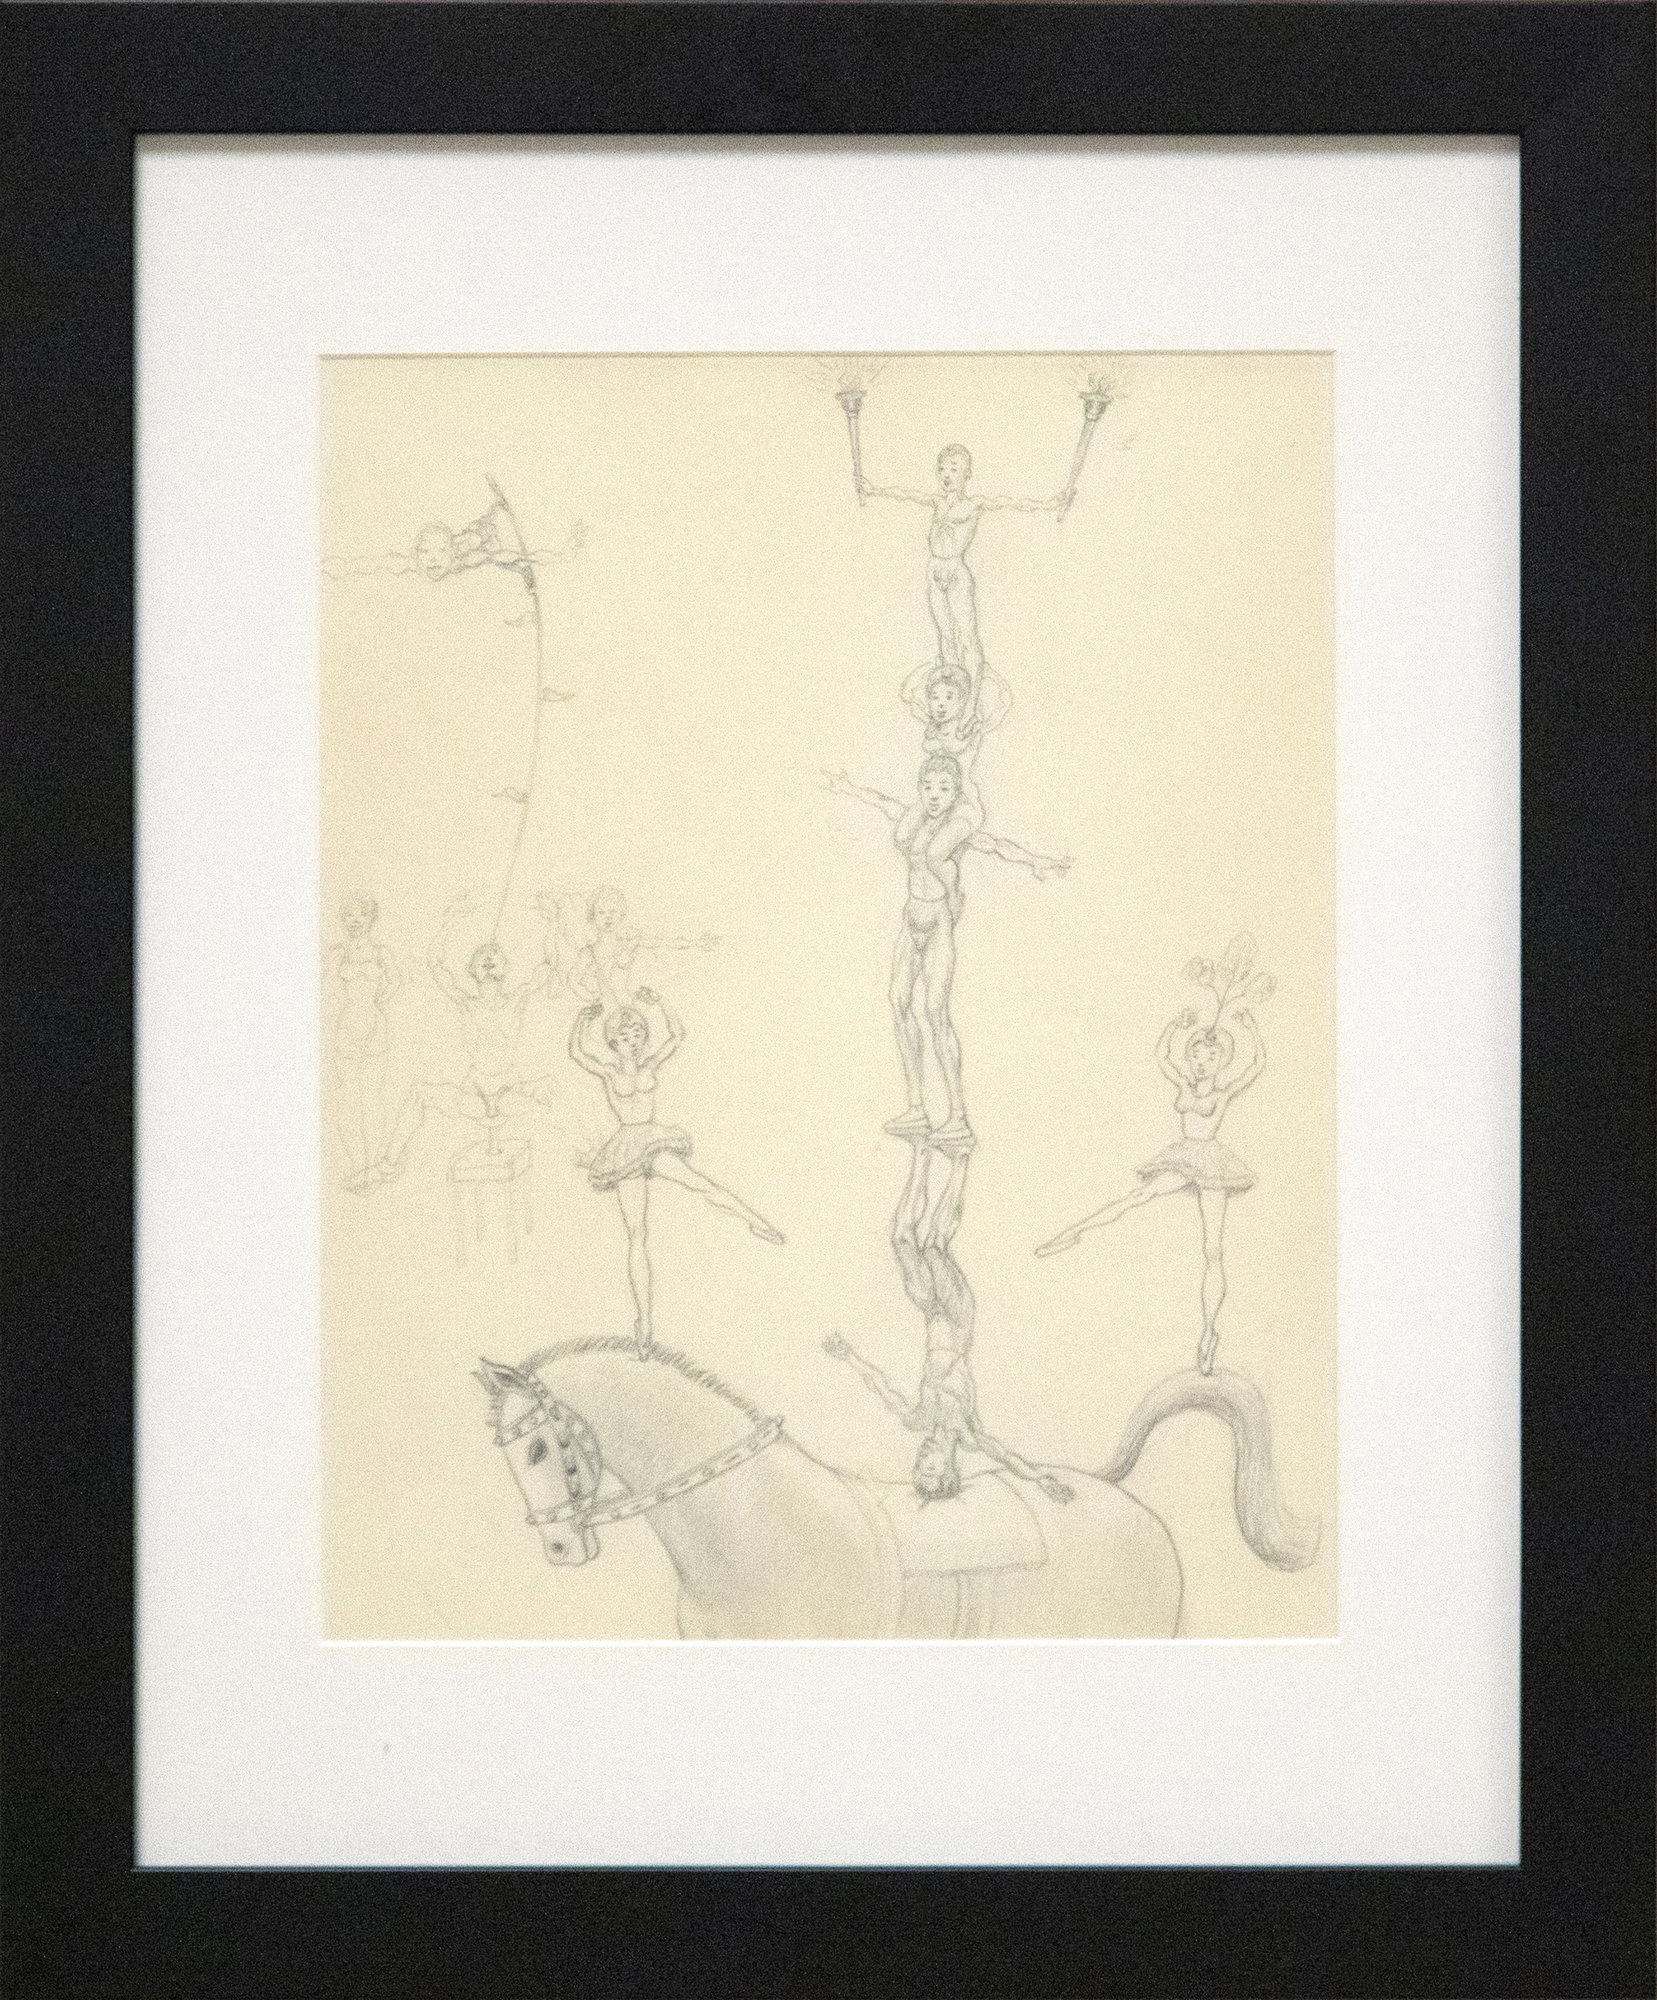 IRVING NORMAN - The Circus, Balancing Act 2 (a Study) - pencil on paper - 11 x 9 in.